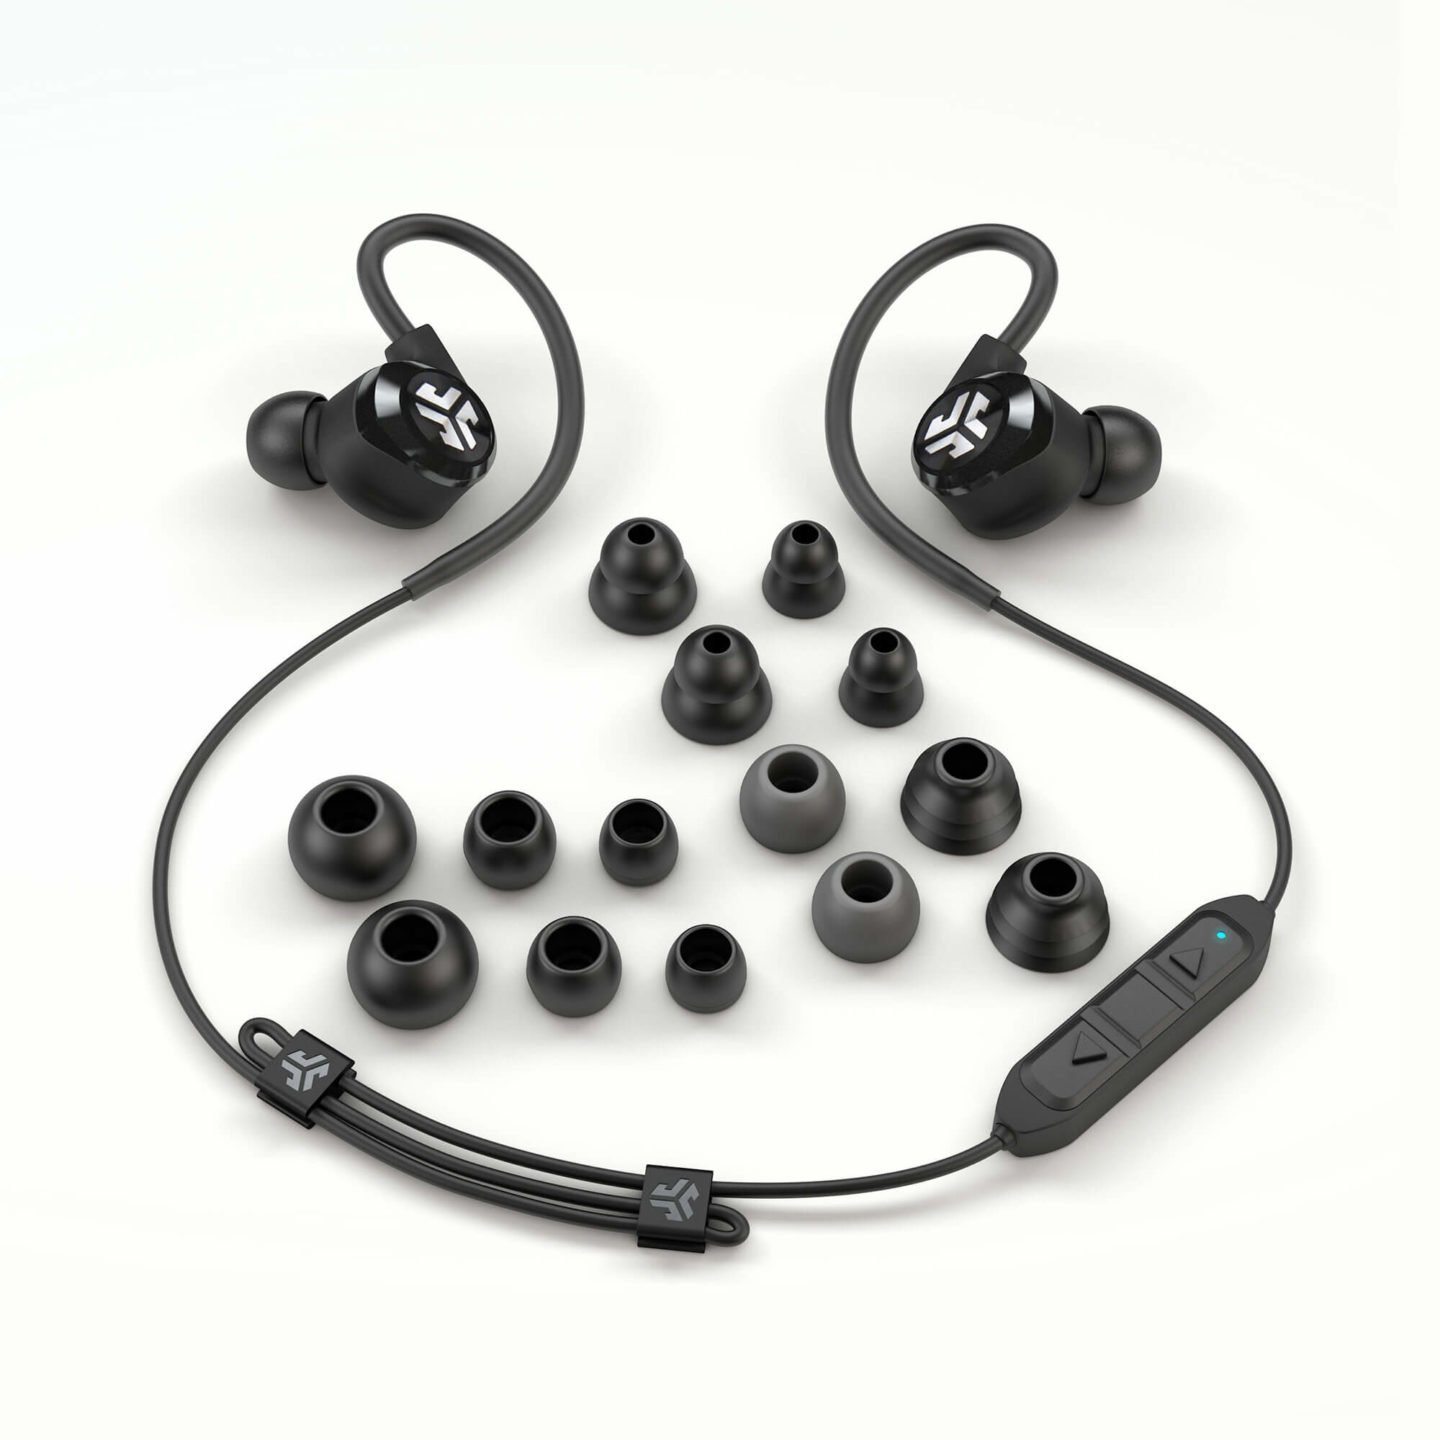 epic 2 black with earbuds